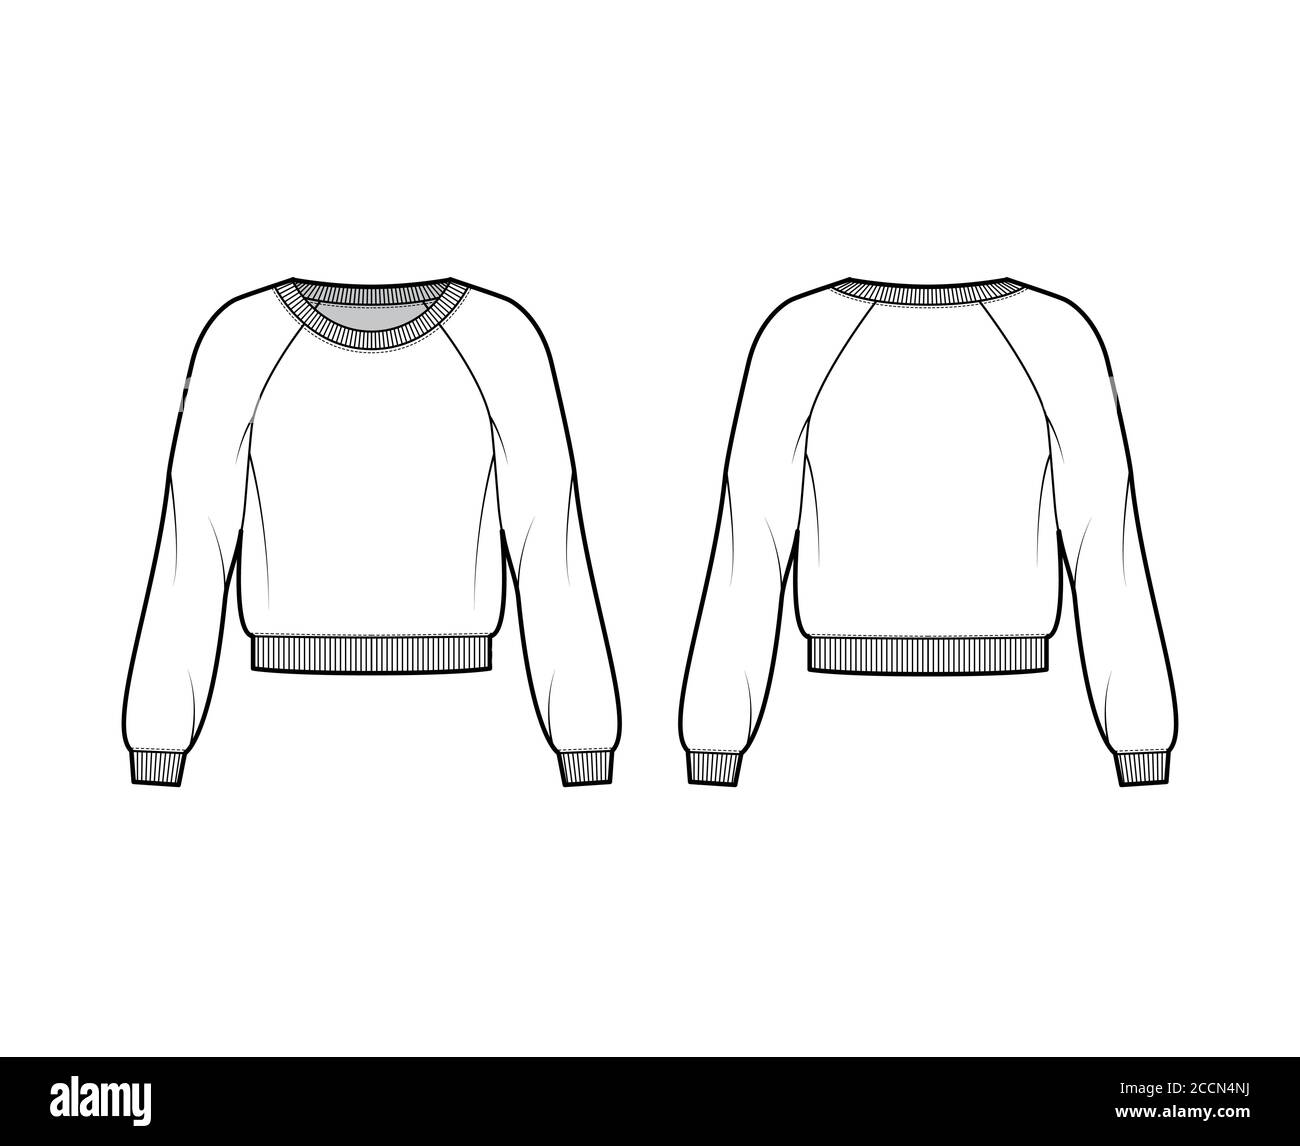 Cotton-terry sweatshirt technical fashion illustration with relaxed fit, scoop neckline, long raglan sleeves, ribbed trims. Flat outwear jumper template front back white color. Women, men unisex top Stock Vector